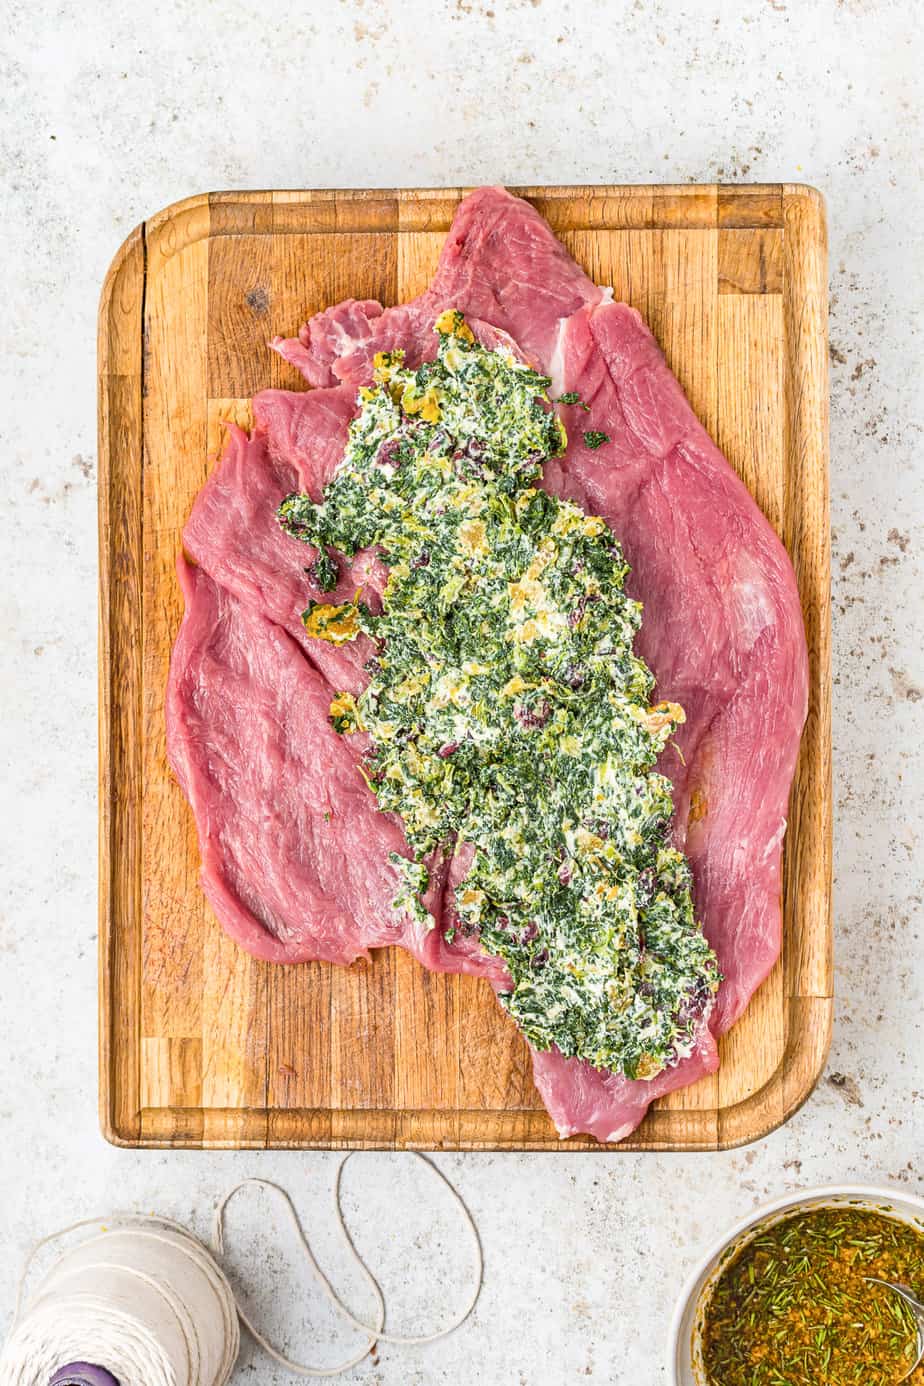 Pork tenderloin on a cutting board butterflied flat with spinach cheese filling spread over top and m ore ingredients nearby on the kitchen counter from overhead.